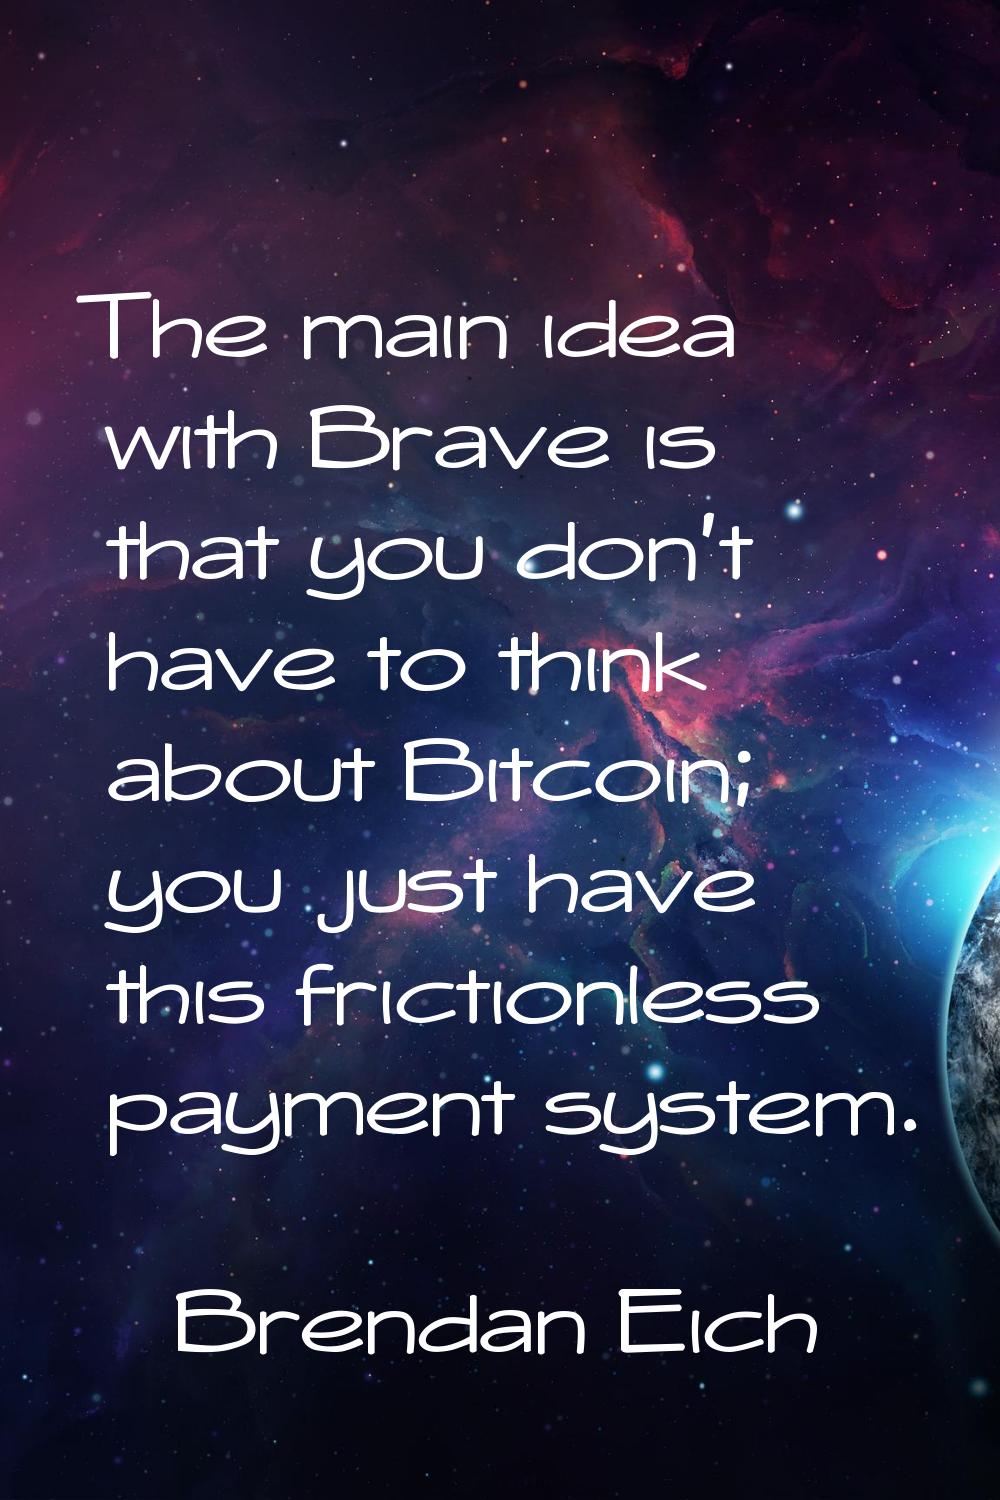 The main idea with Brave is that you don't have to think about Bitcoin; you just have this friction